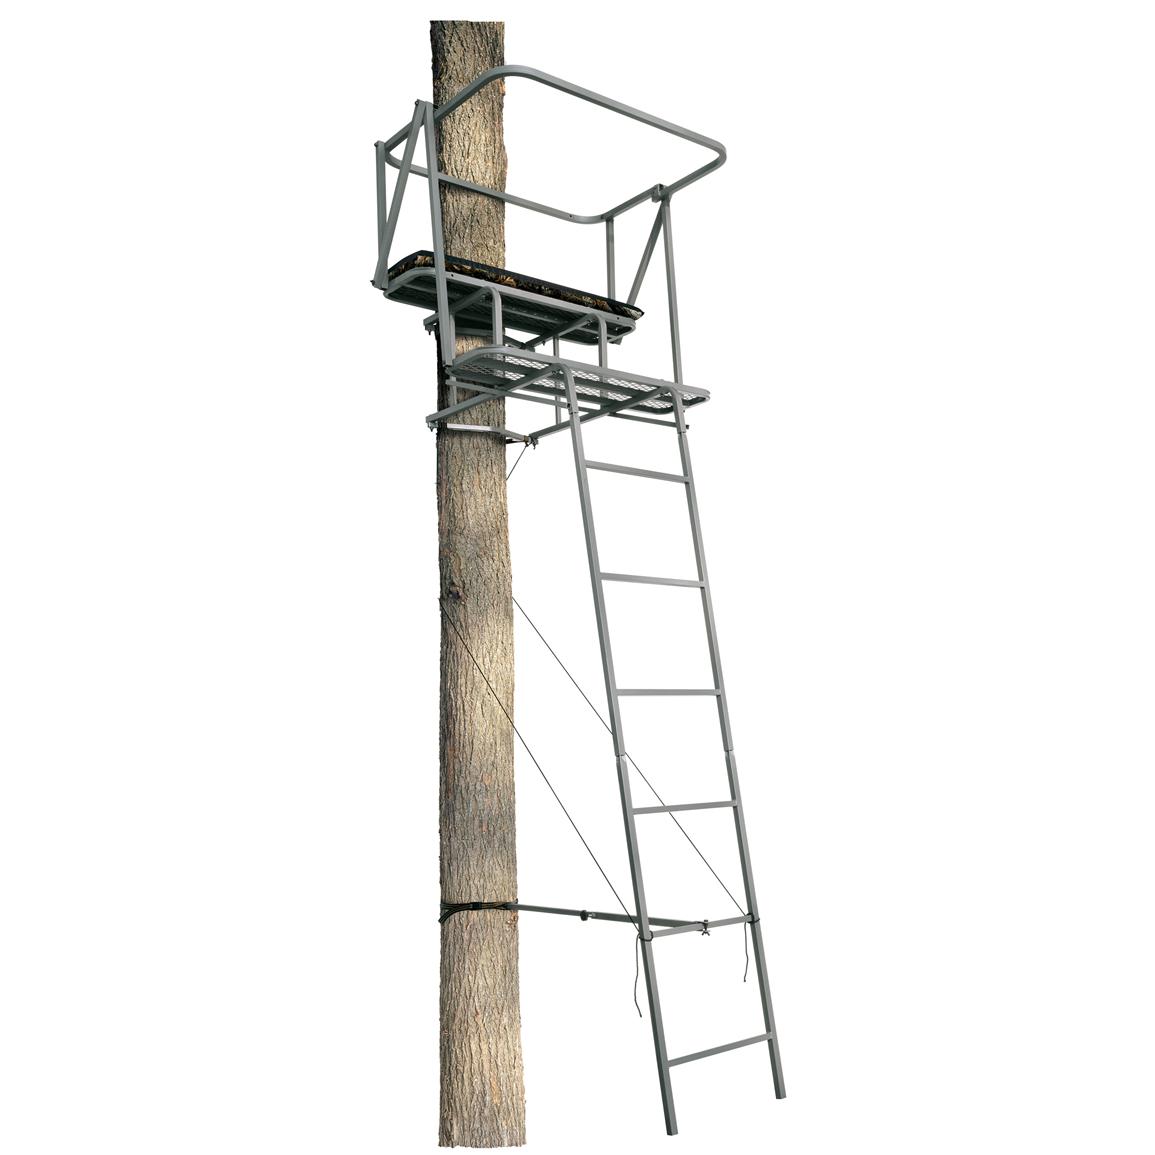 hunter-s-view-12-buddy-stand-104913-ladder-tree-stands-at